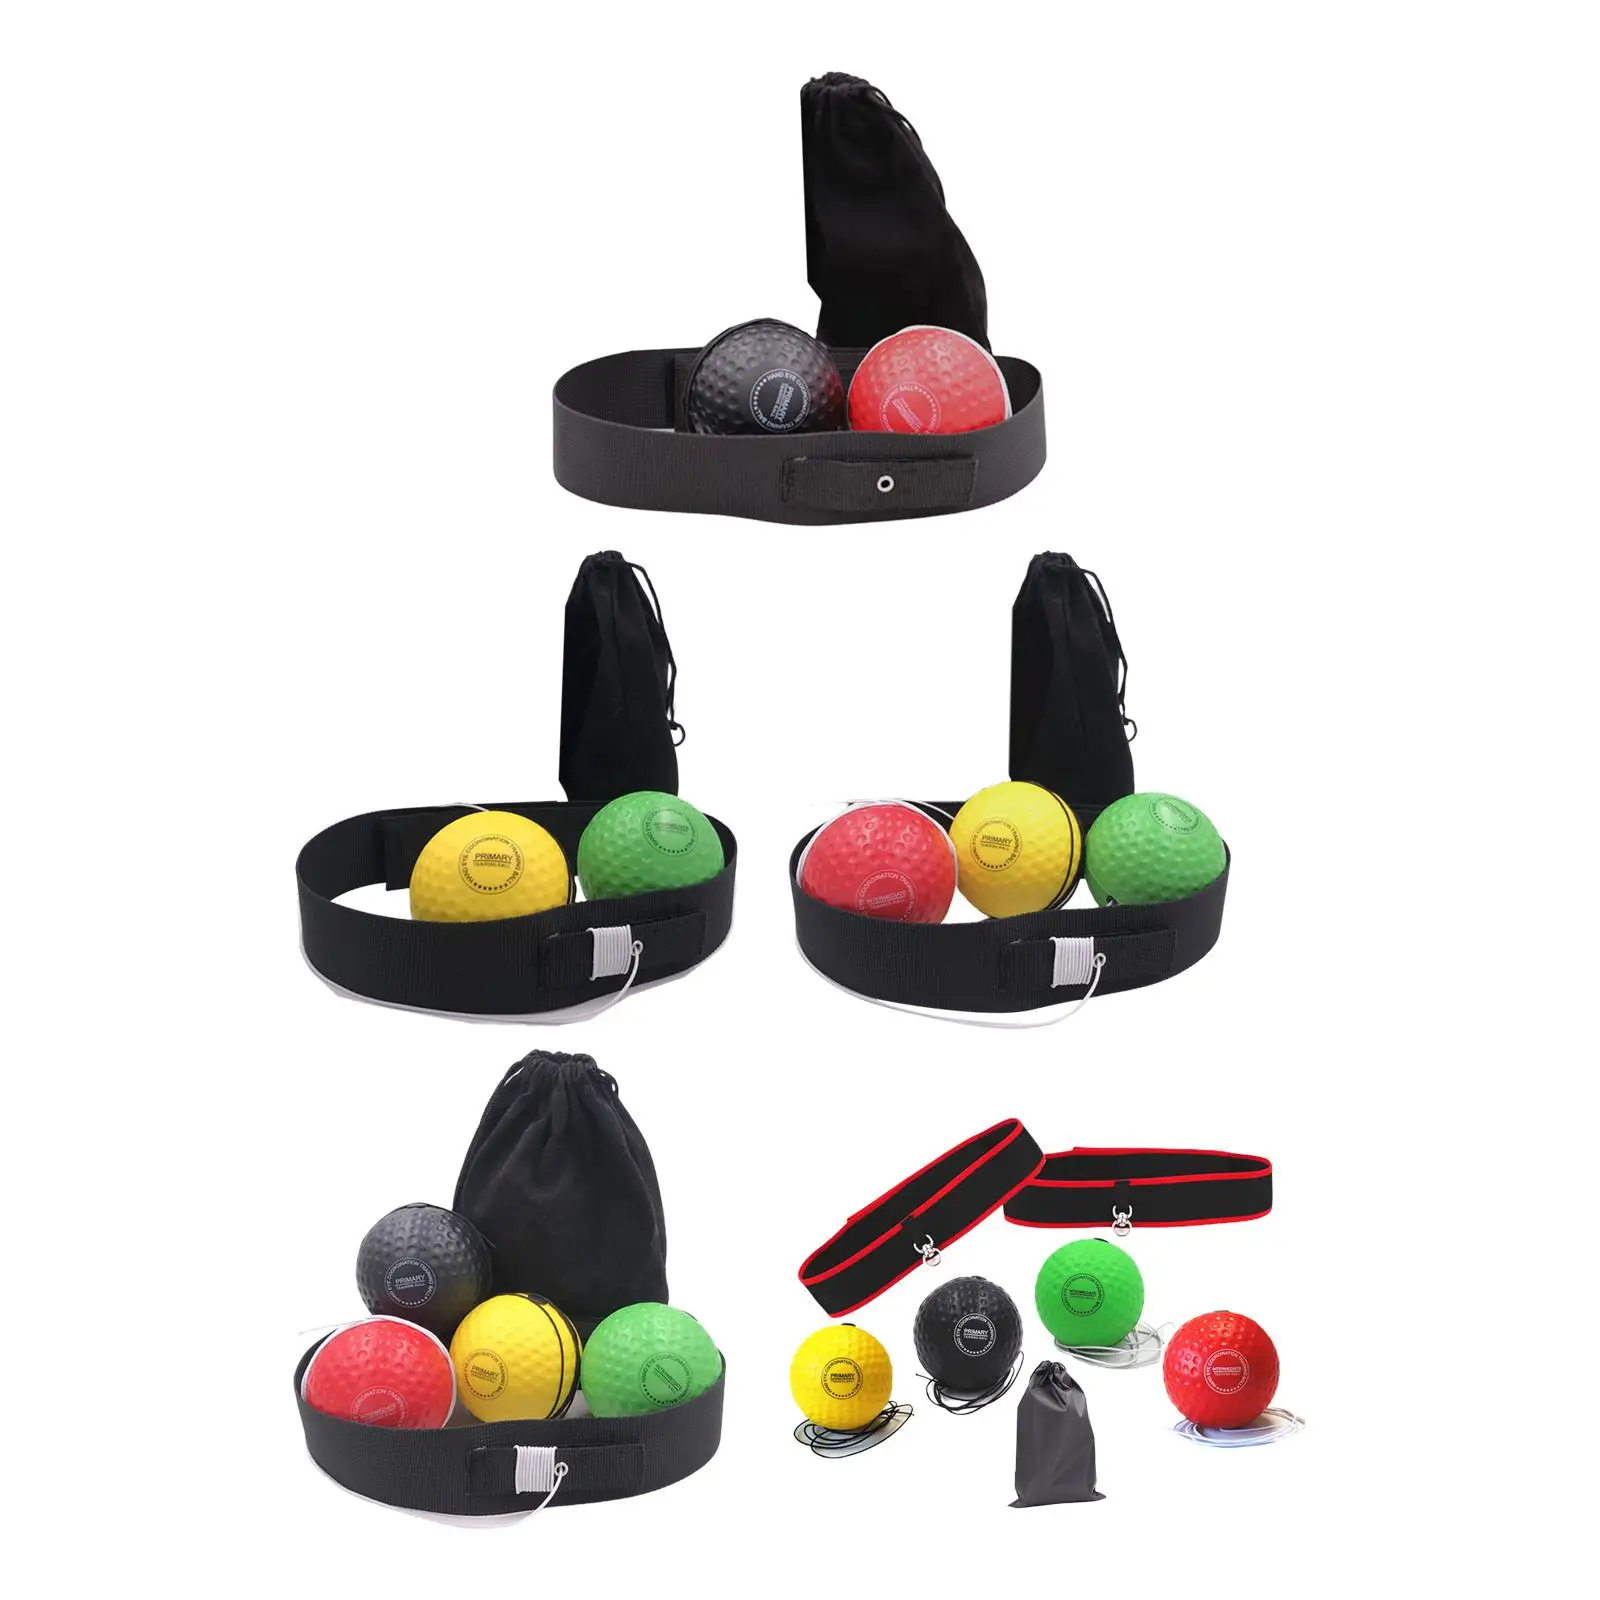 Boxing Reflex Ball Headband Hand Eye Coordination Training Improve Reaction Speed Adjustable for Exercise Fitness Adults